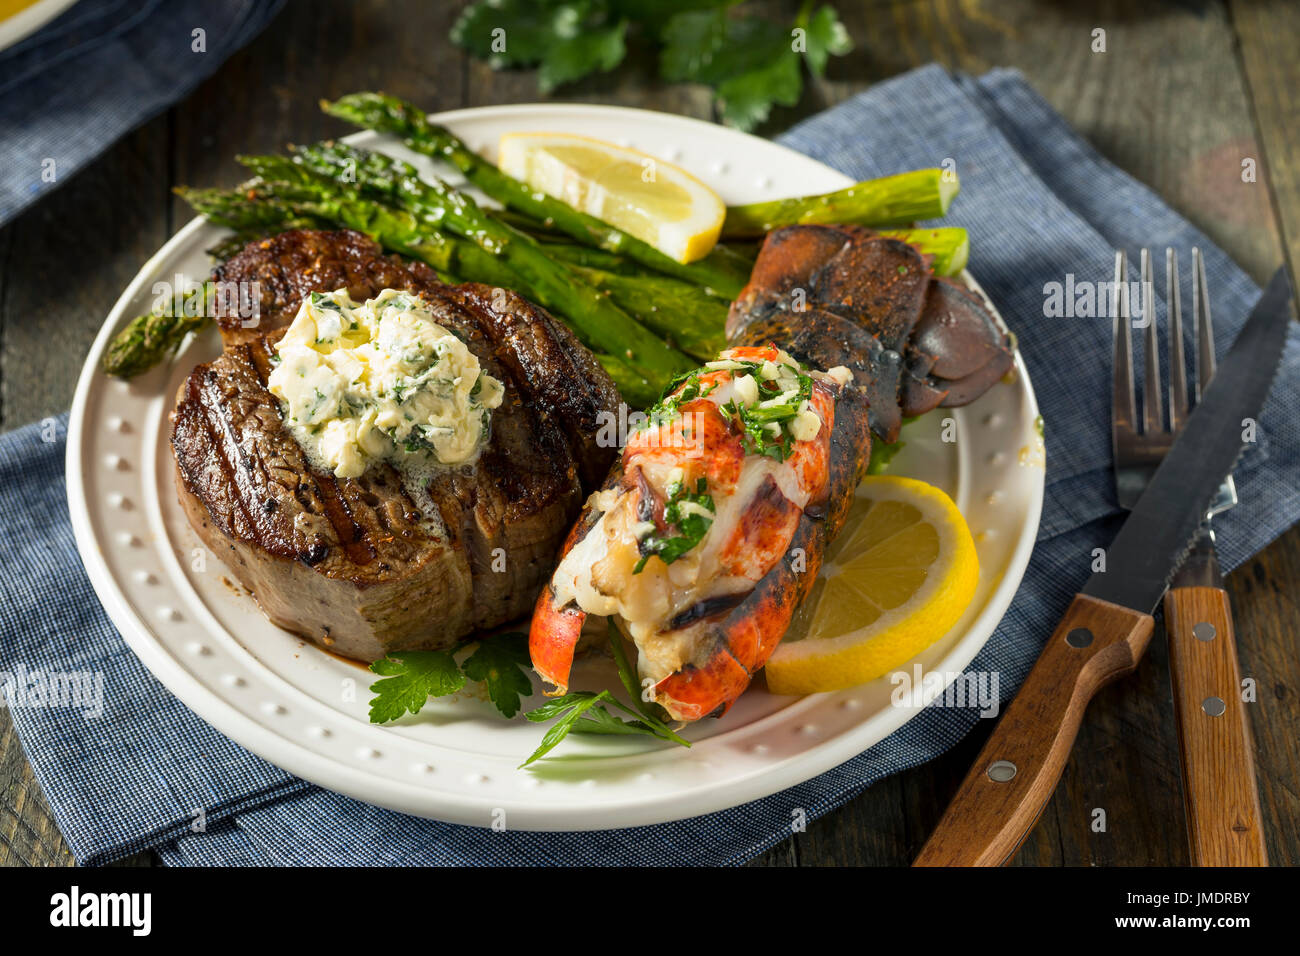 Homemade Steak and Lobster Surf n Turf with Asparagus Stock Photo